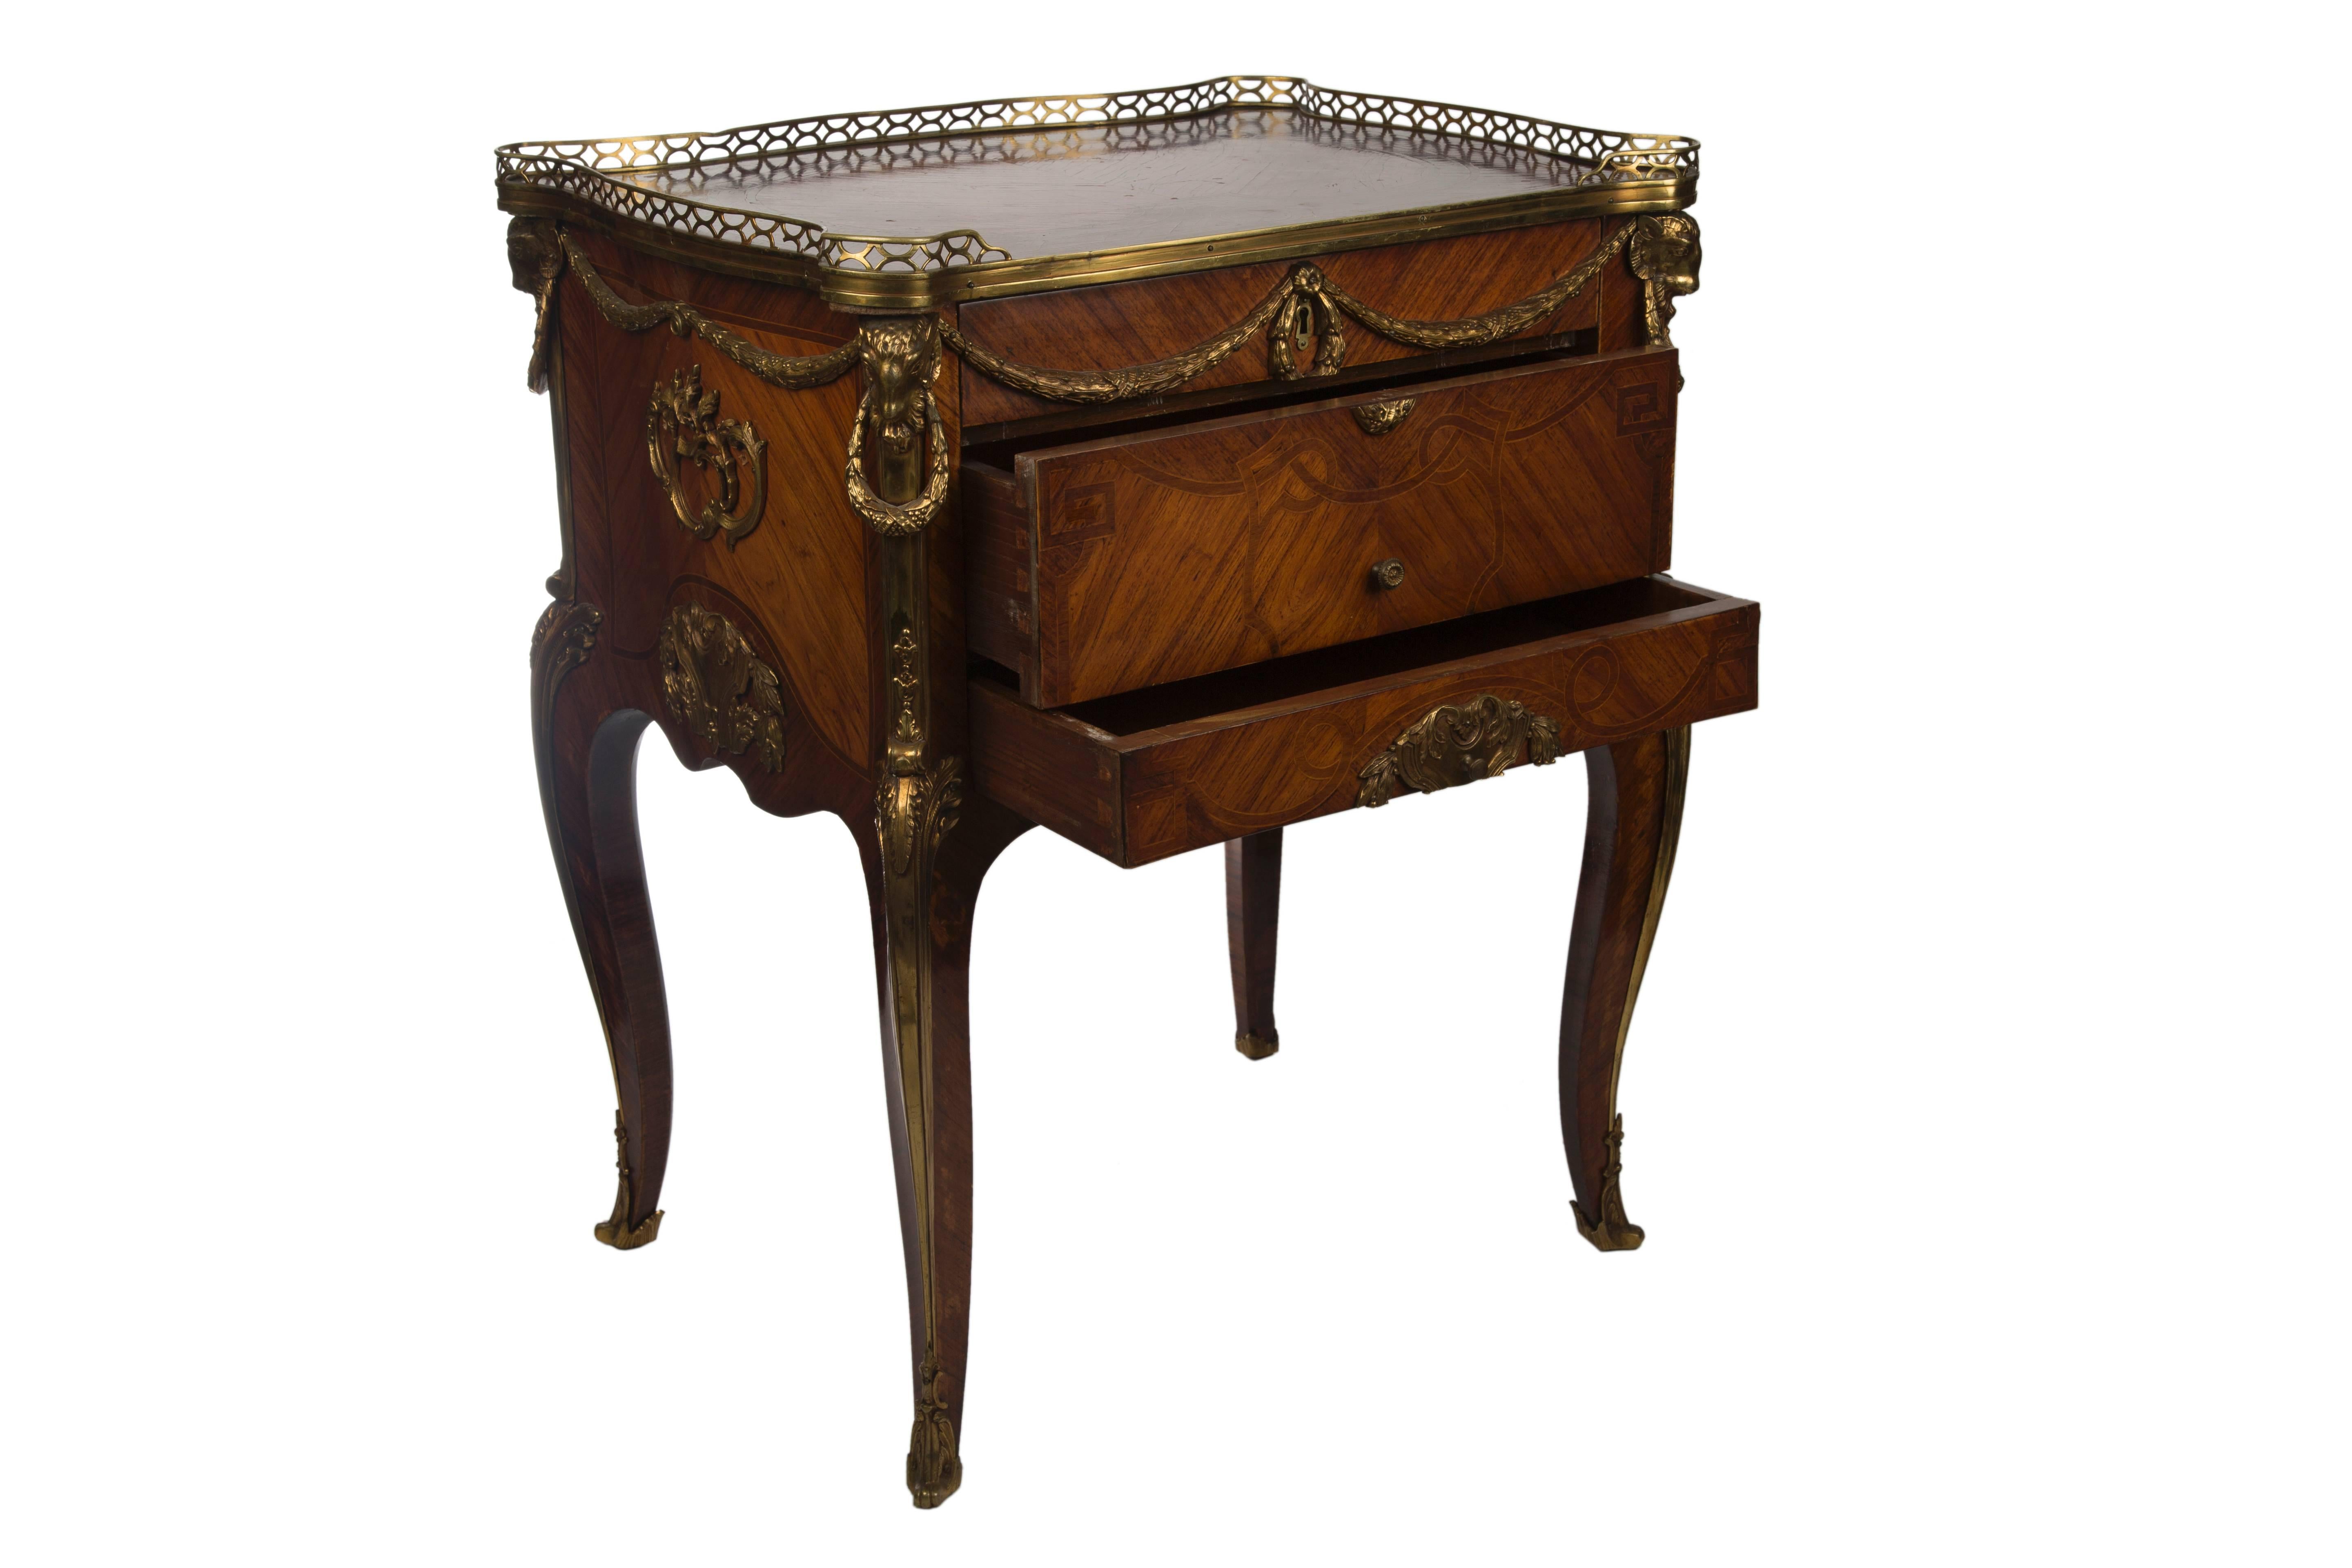 19th Century French Gilt-Bronze Mounted Mahogany Kingwood and Tulipwood Table Ecrire